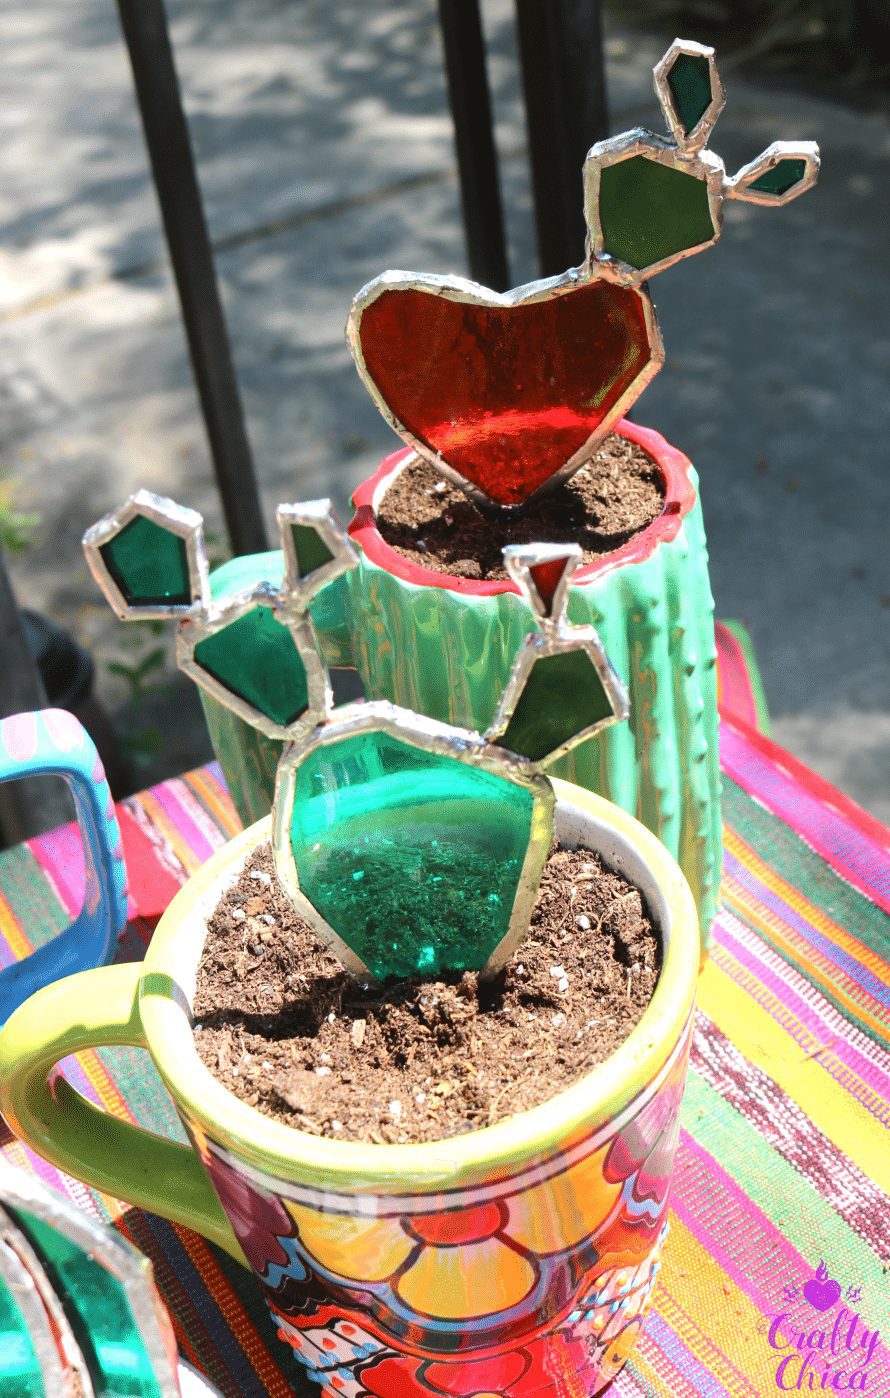 How to make a stained glass cactus by Crafty Chica.